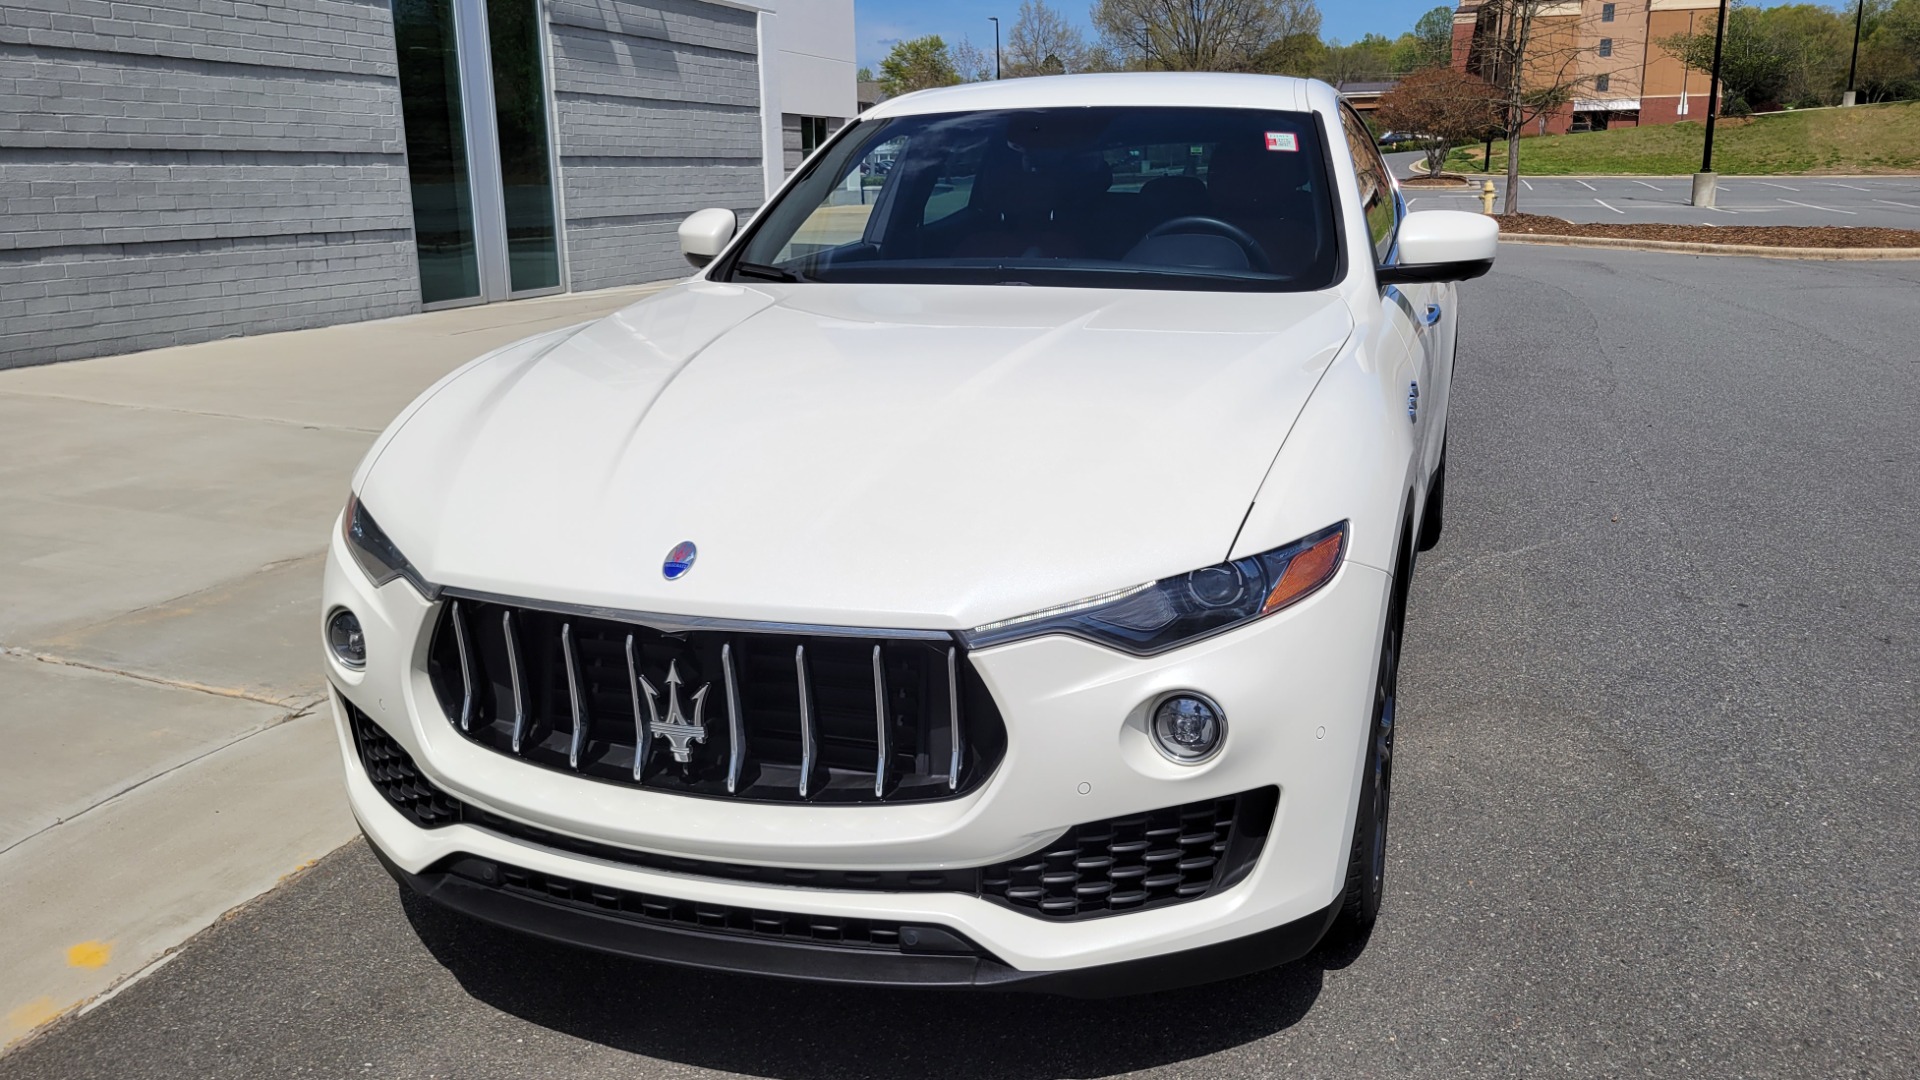 Used 2018 Maserati LEVANTE 3.0L 345HP SUV / 8-SPD / PREMIUM / BSA / NAV / 20IN WHLS / REARVIEW for sale $50,495 at Formula Imports in Charlotte NC 28227 3